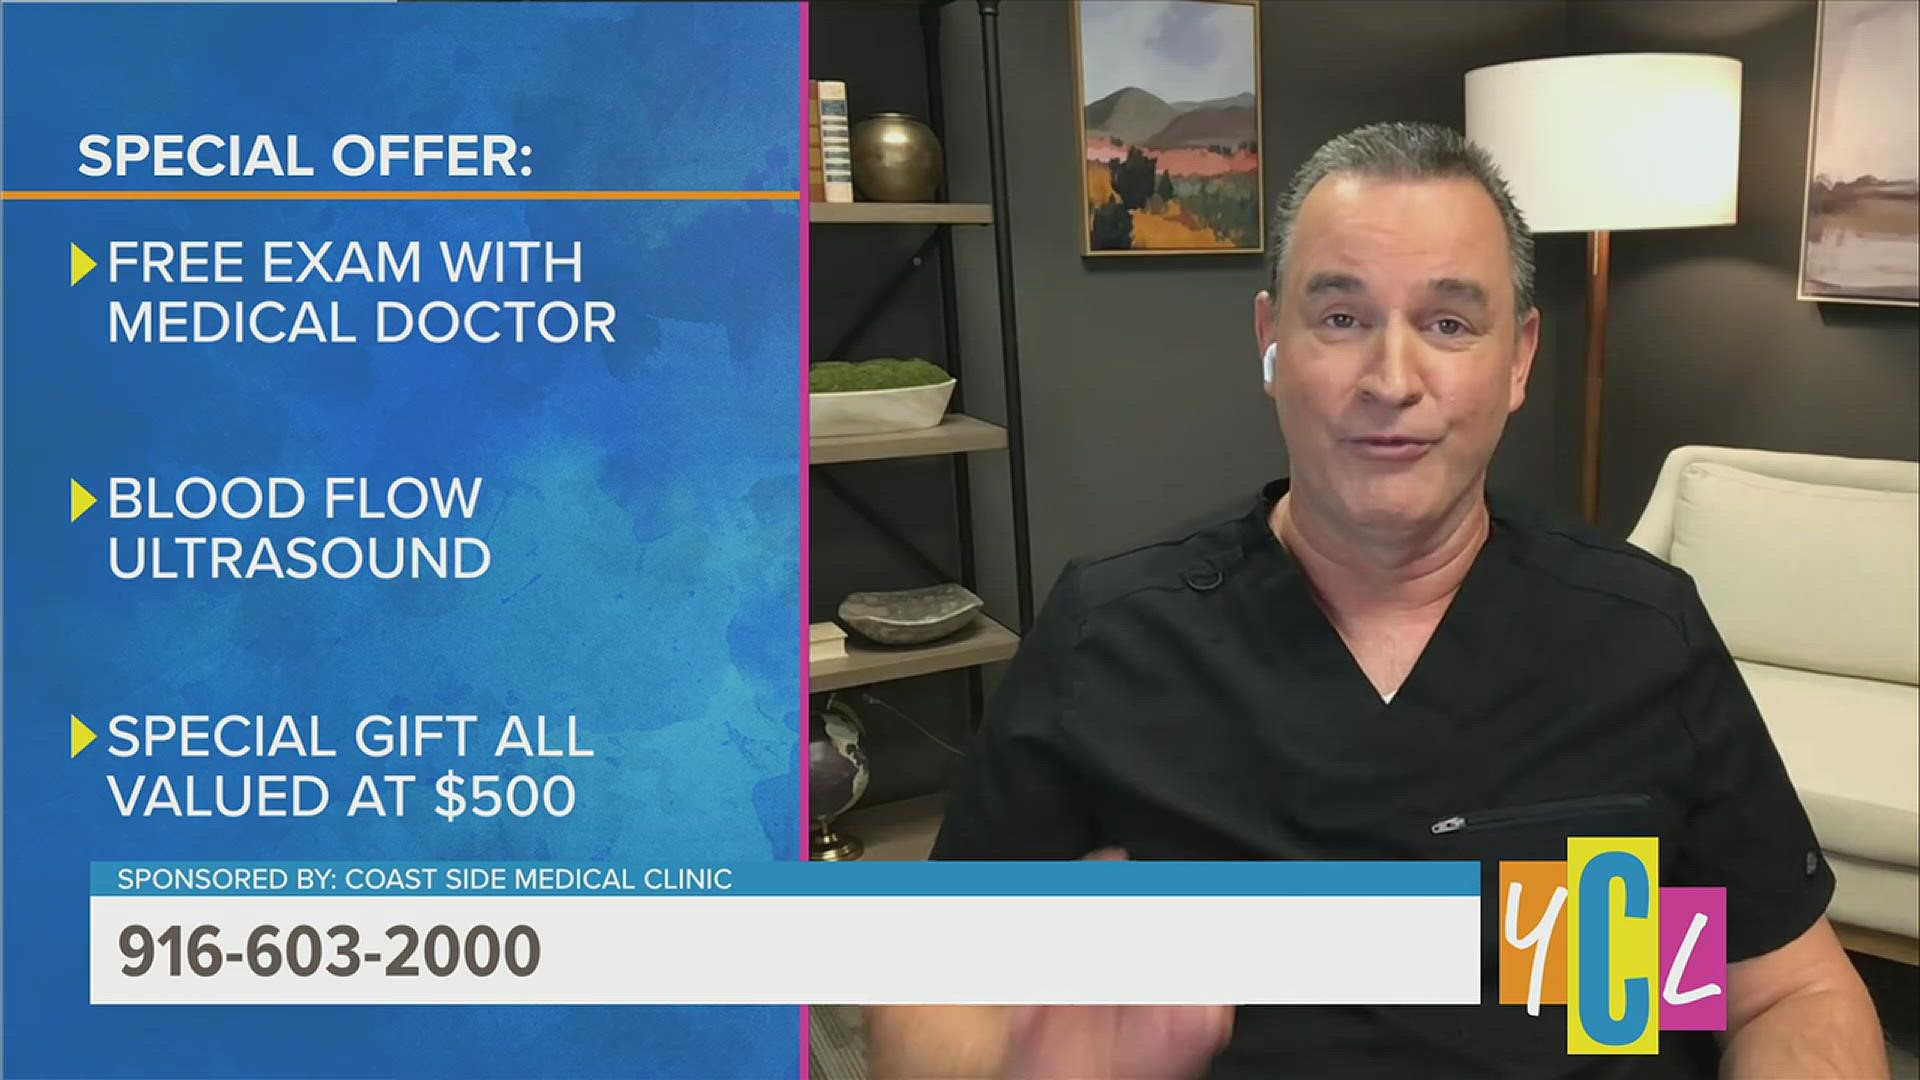 For a discreet, professional environment to discuss concerns about male potency, this clinic may be able to help. This segment is paid by Coast Side Medical Clinic.